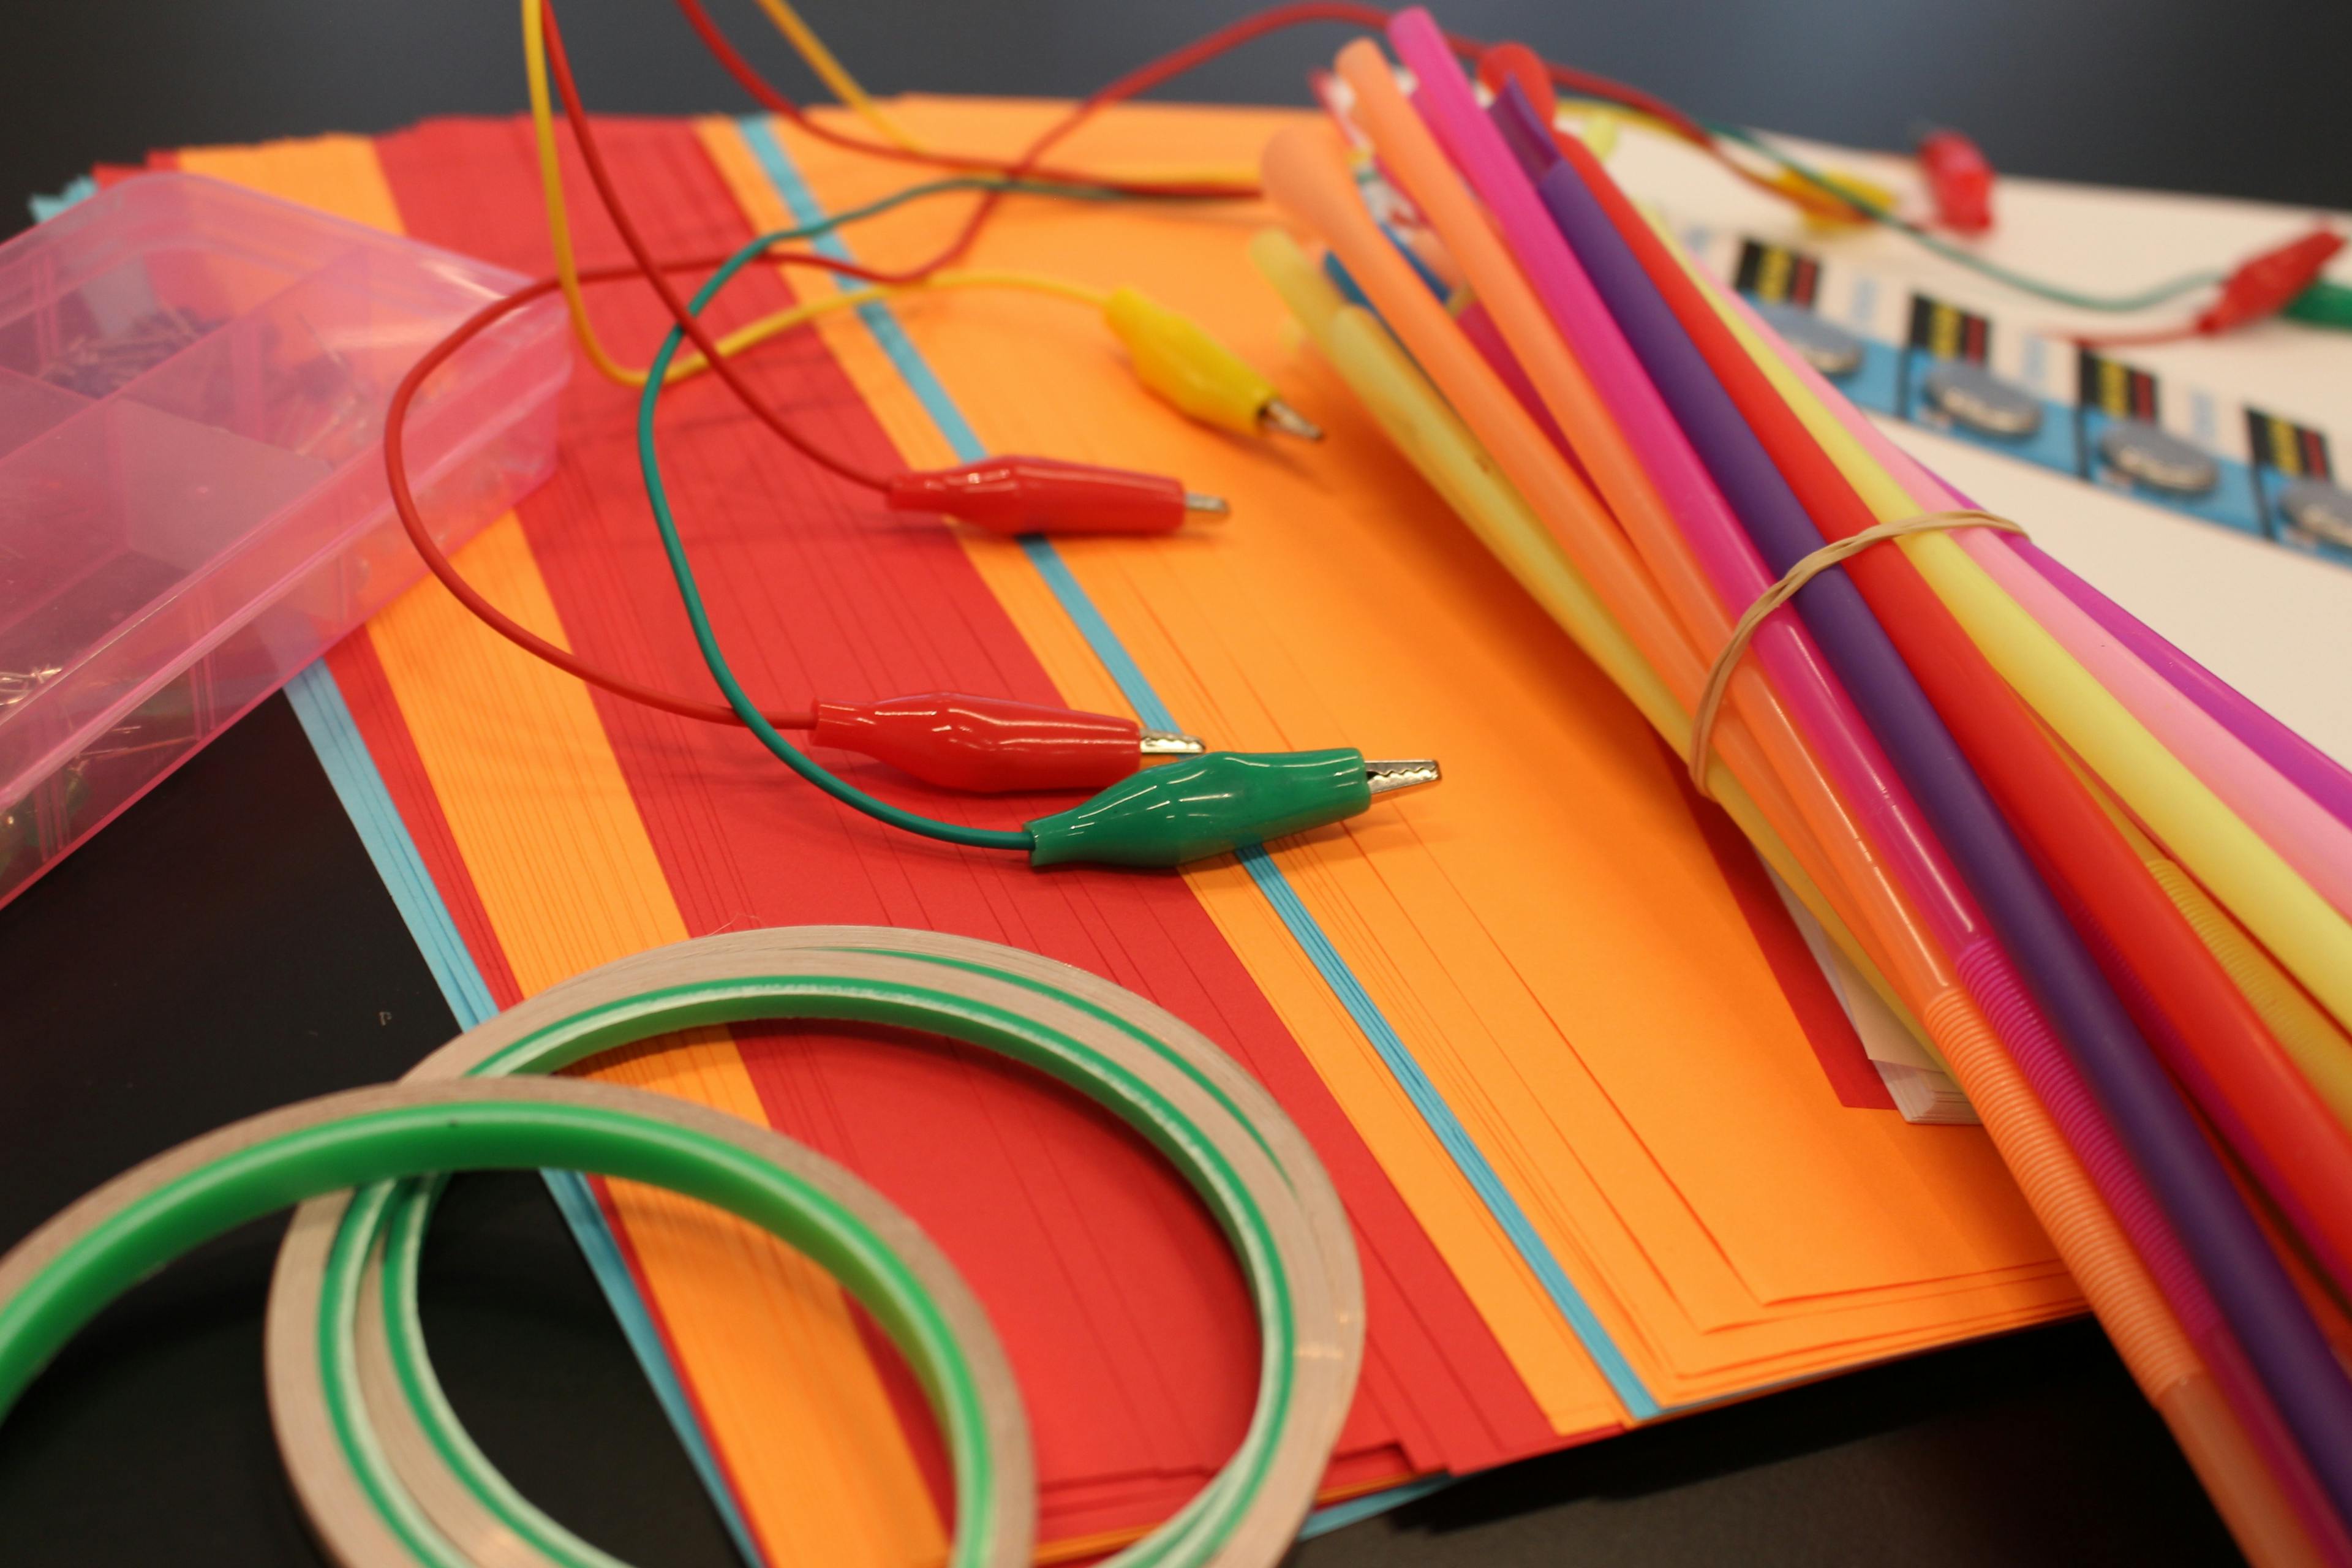 Colorful craft materials for tinkering and creating.